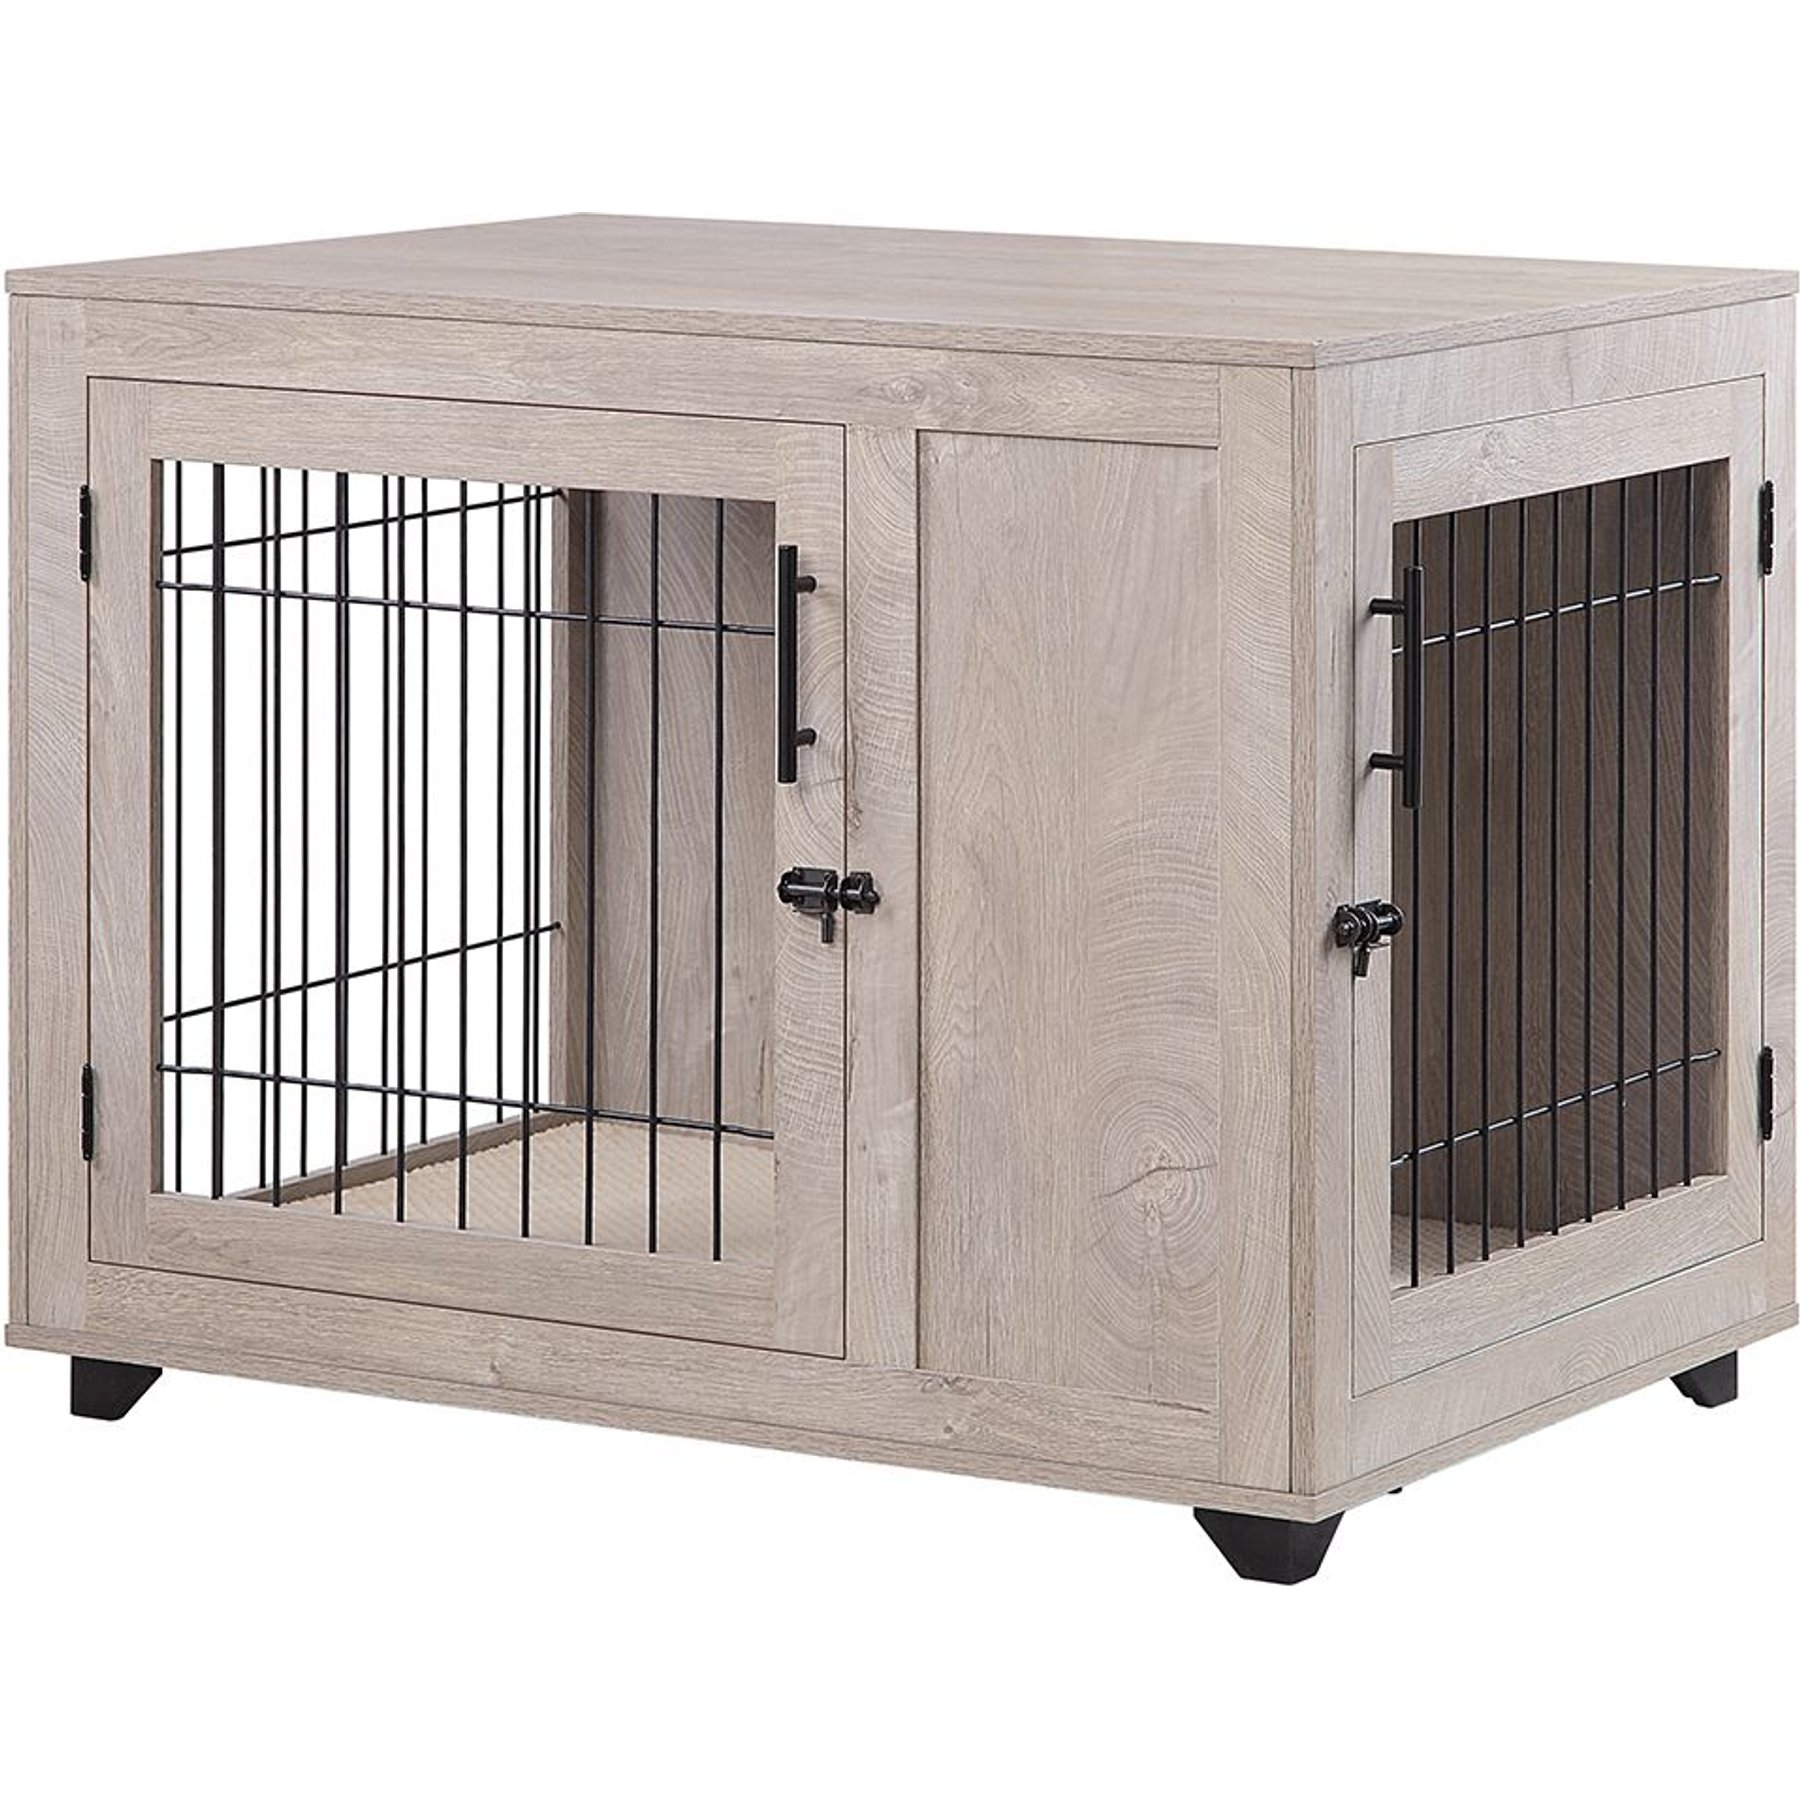 MERRY PRODUCTS Double Door Furniture Style Dog Crate, Mahogany, 42 inch 